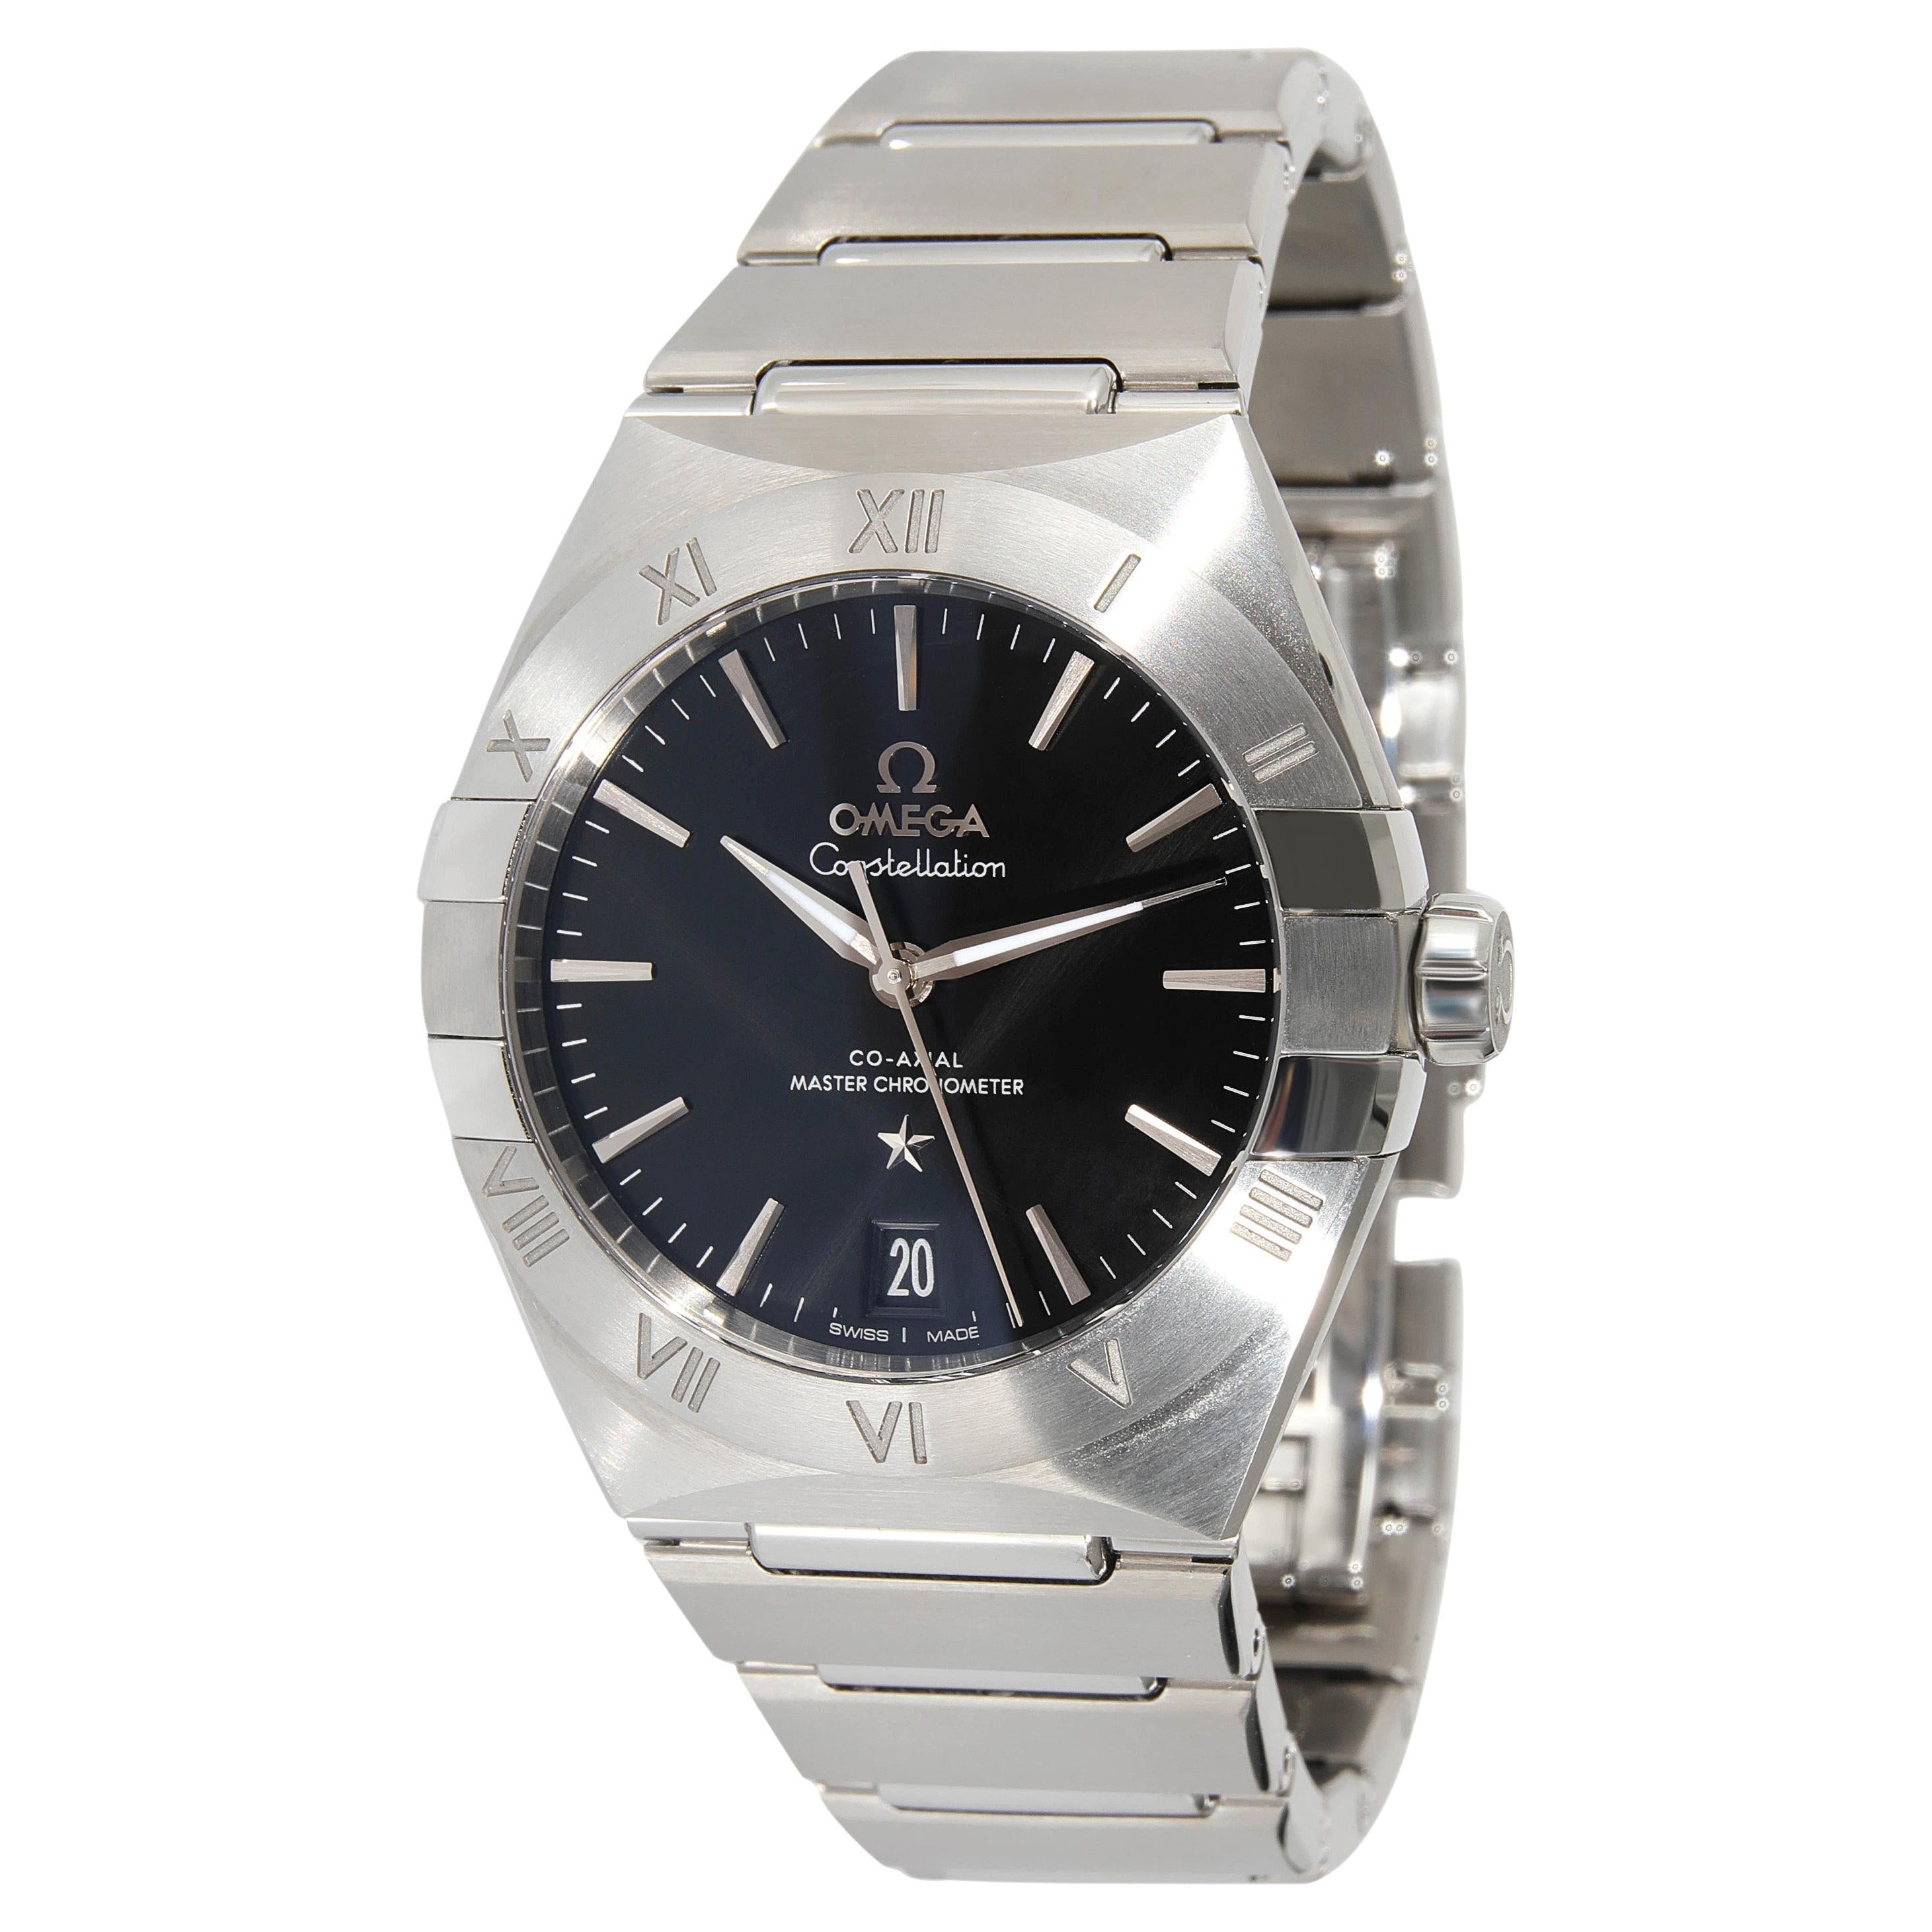 Omega Constellation 131.10.36.20.01.001 Men's Watch in  Stainless Steel